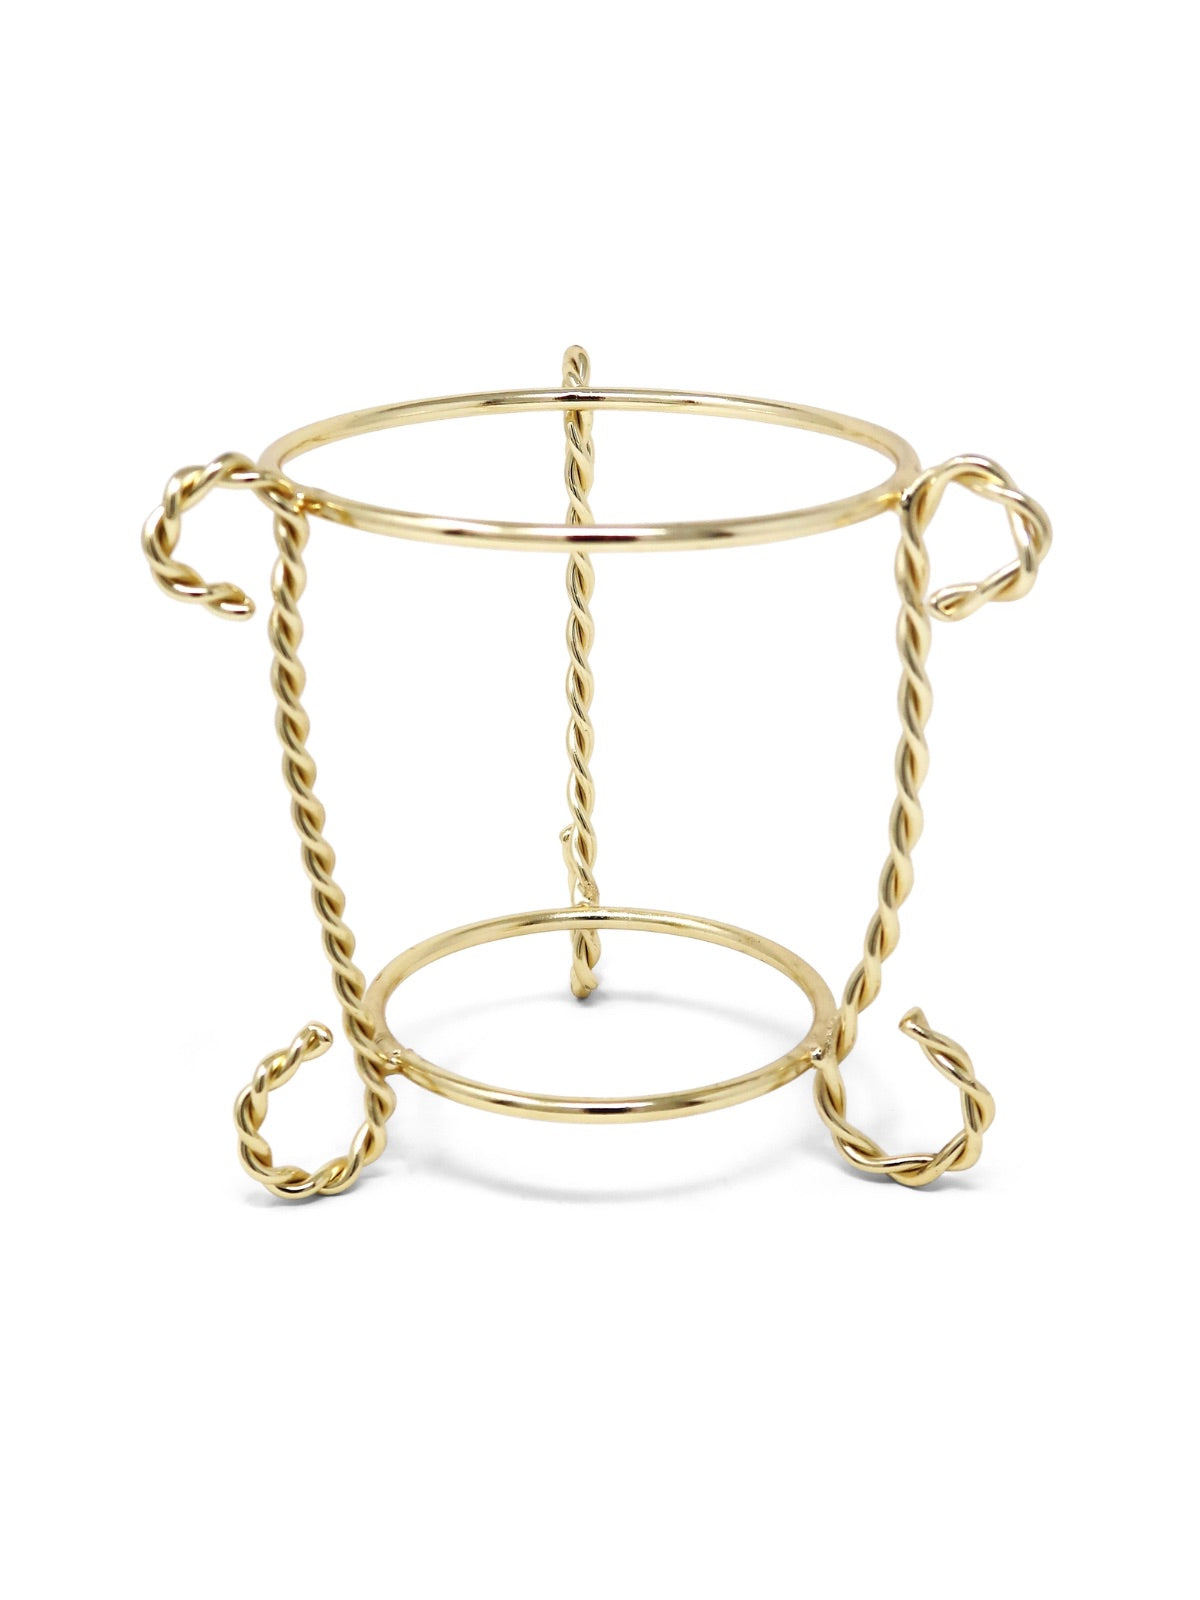 Glass Candle Holder on a Gold Brass Twirled Design Stand - Luxury Home Goods.